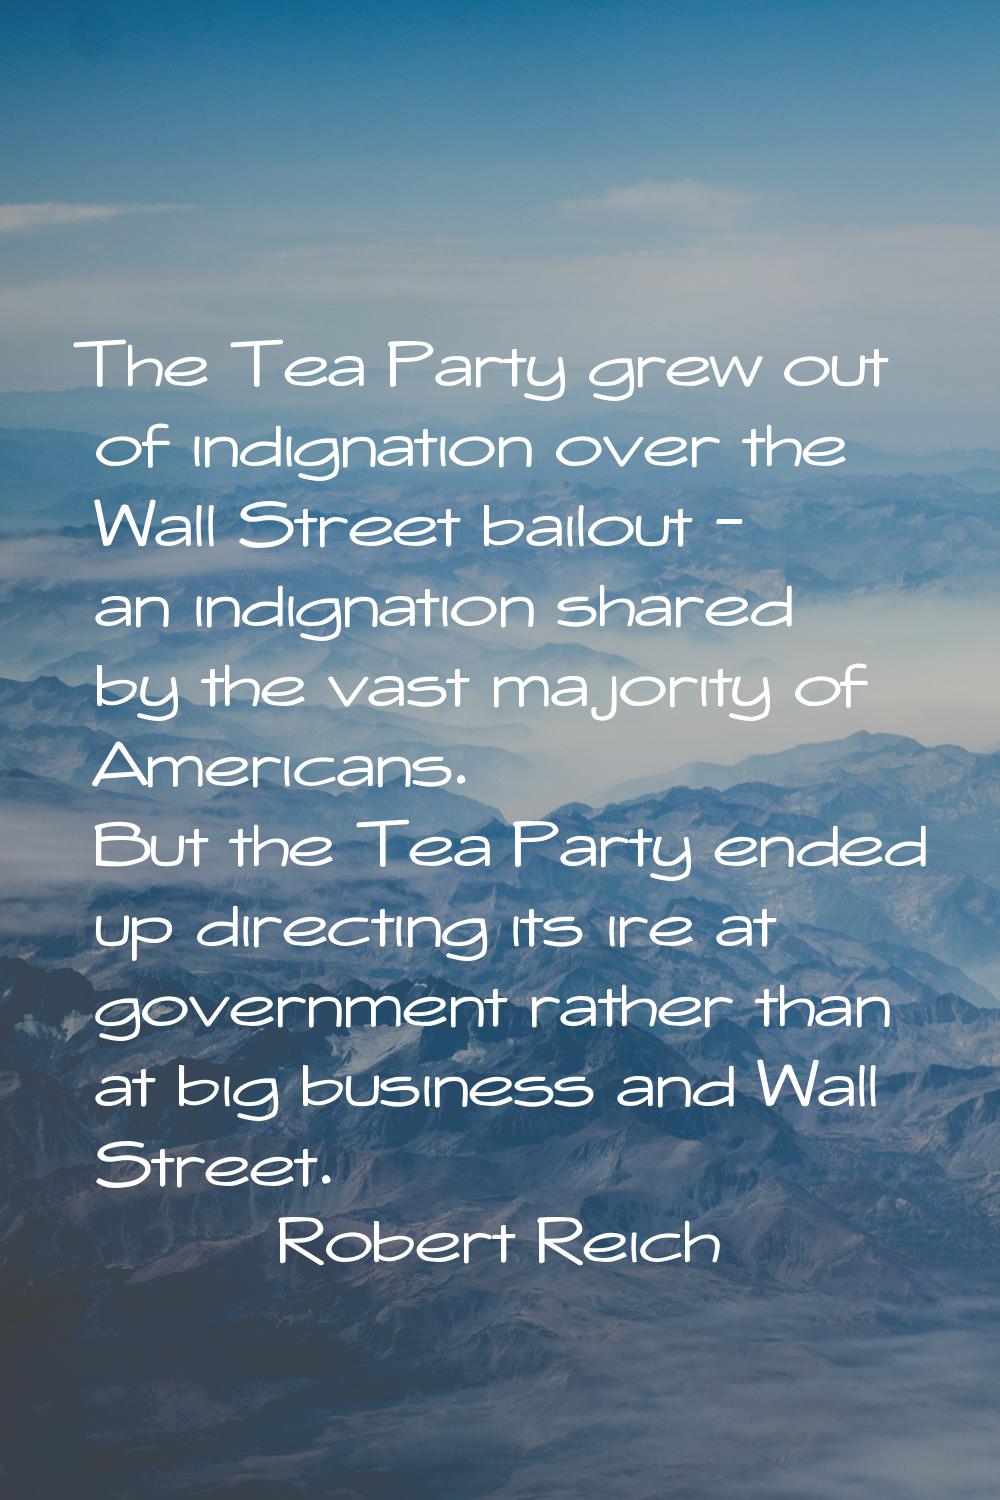 The Tea Party grew out of indignation over the Wall Street bailout - an indignation shared by the v